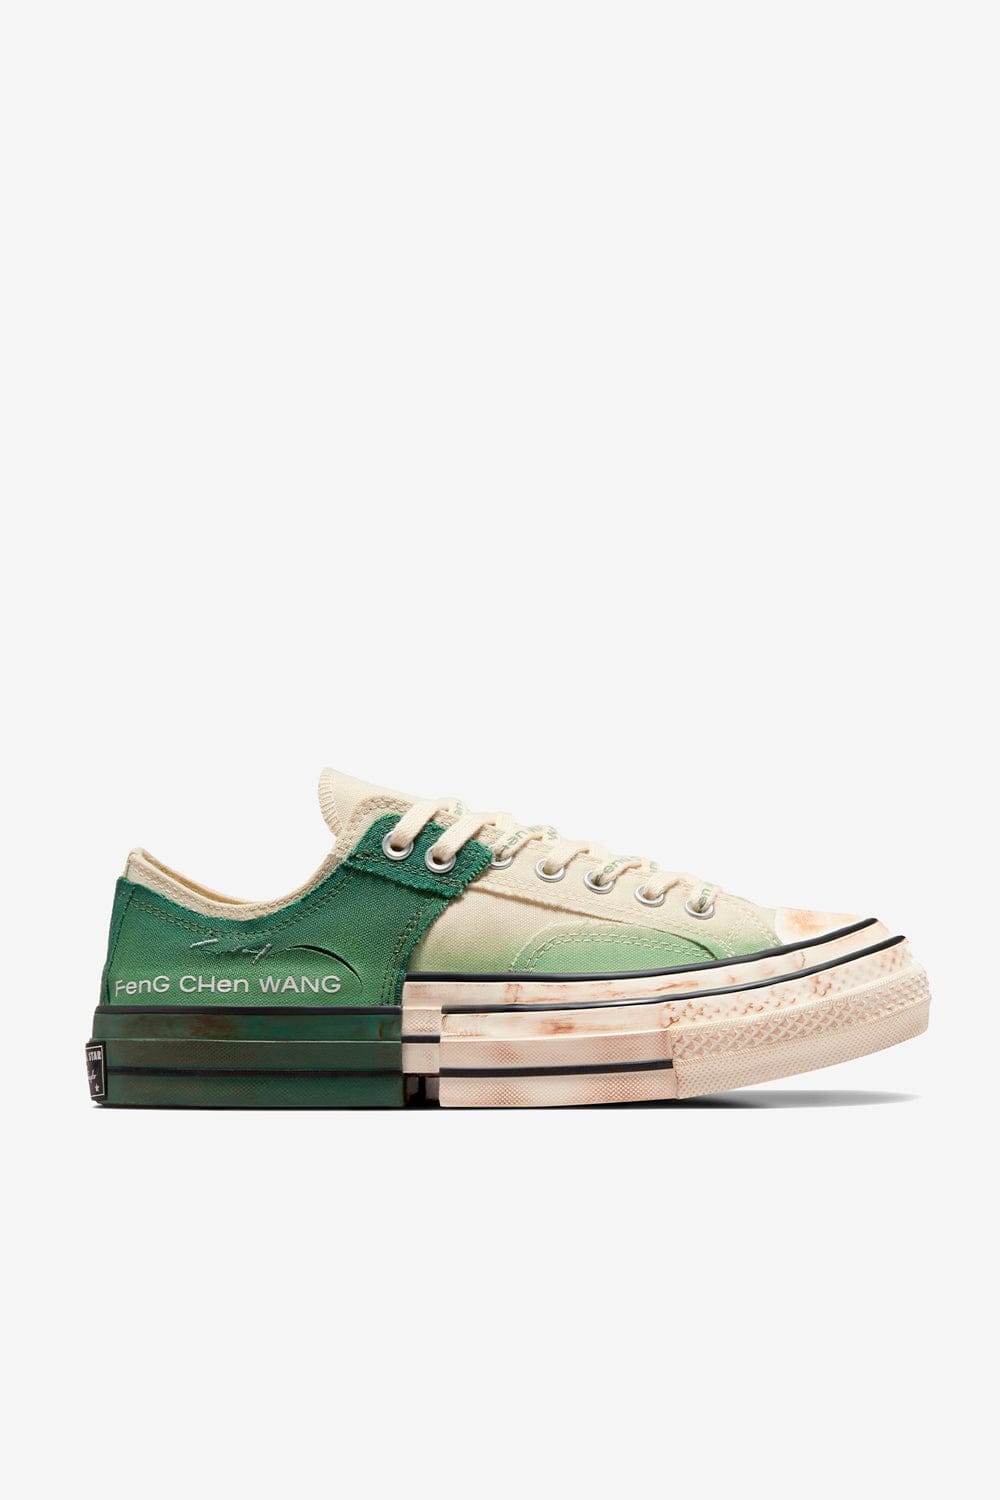 Converse Chuck 70 2-IN-1 Ox Feng Chen Wang (Natural Ivory/Myrtle/Egret)